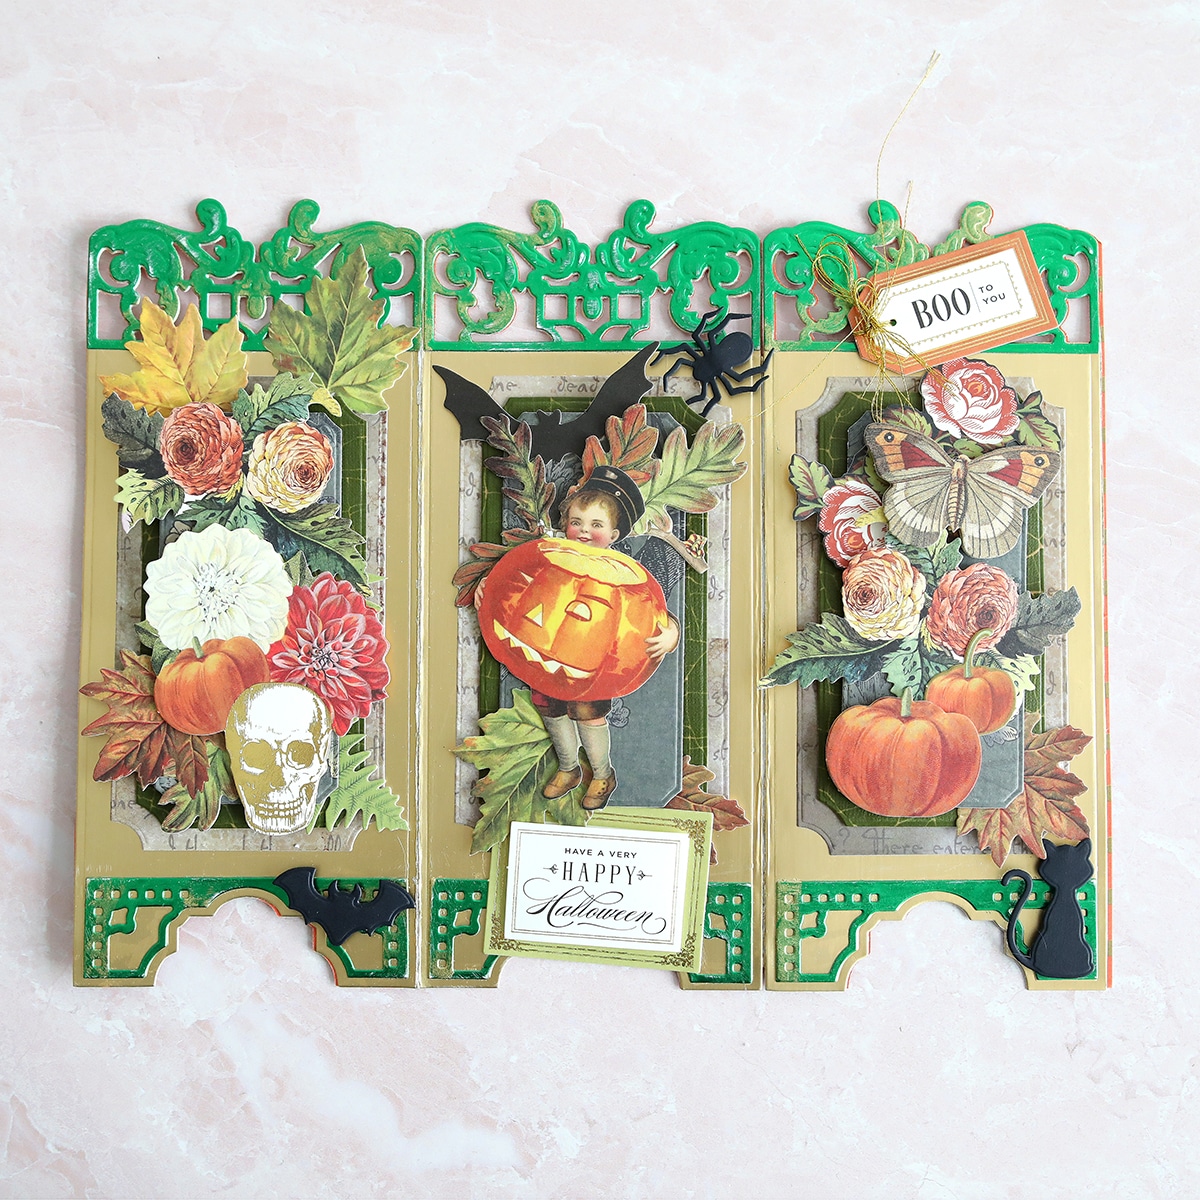 A three dimensional halloween card with a pumpkin on it.